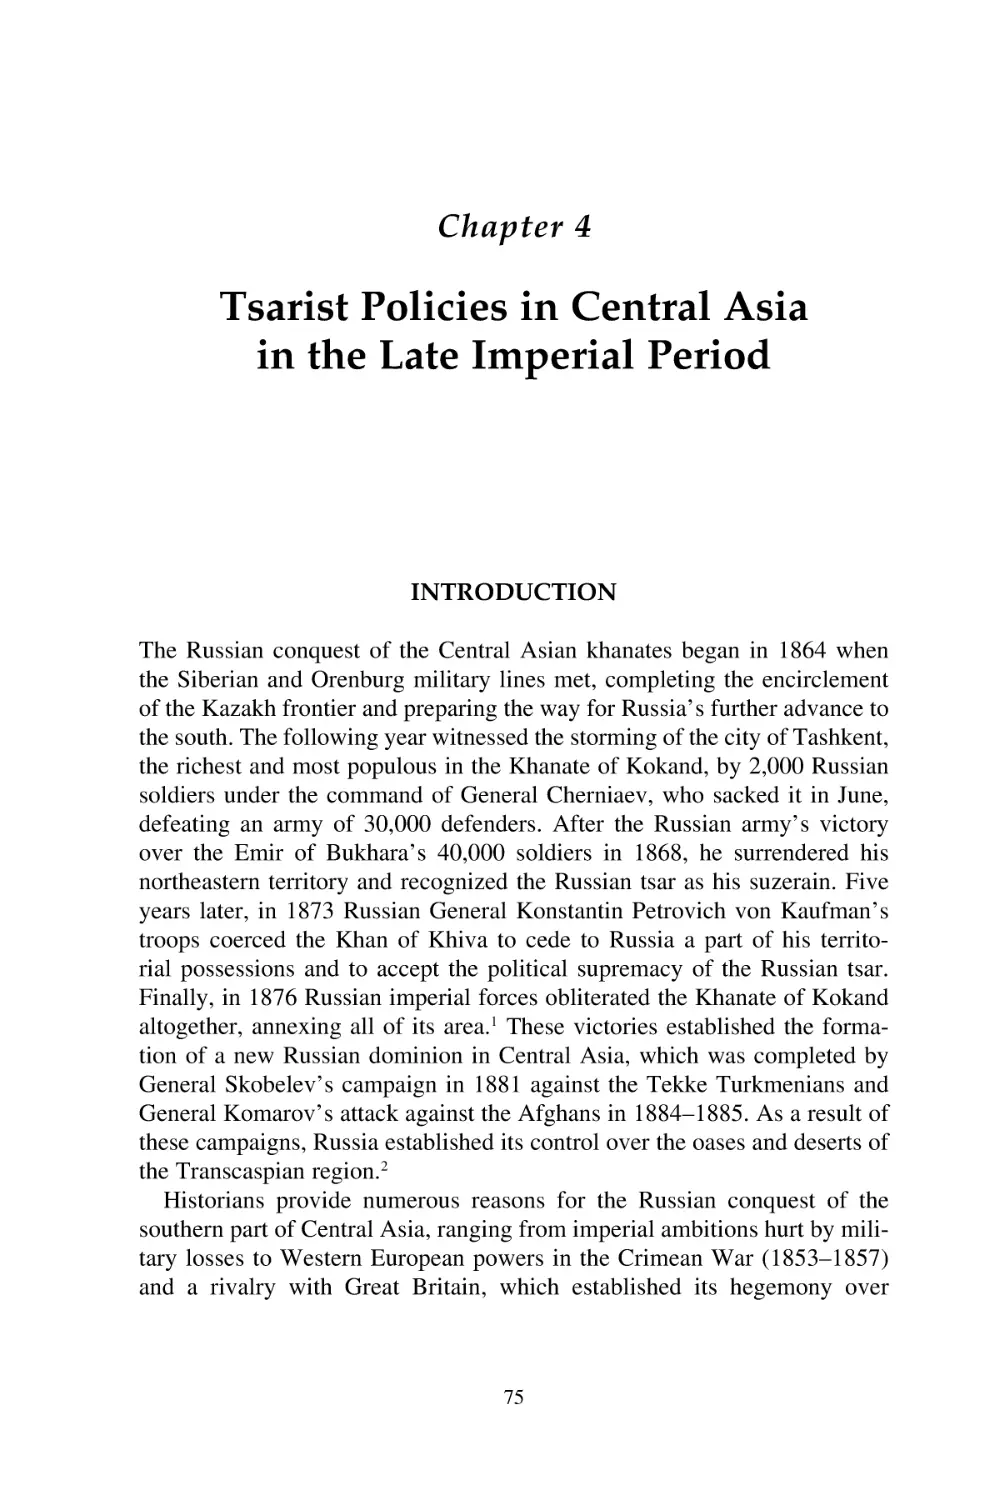 4. Tsarist Policies in Central Asia in the Late Imperial Period